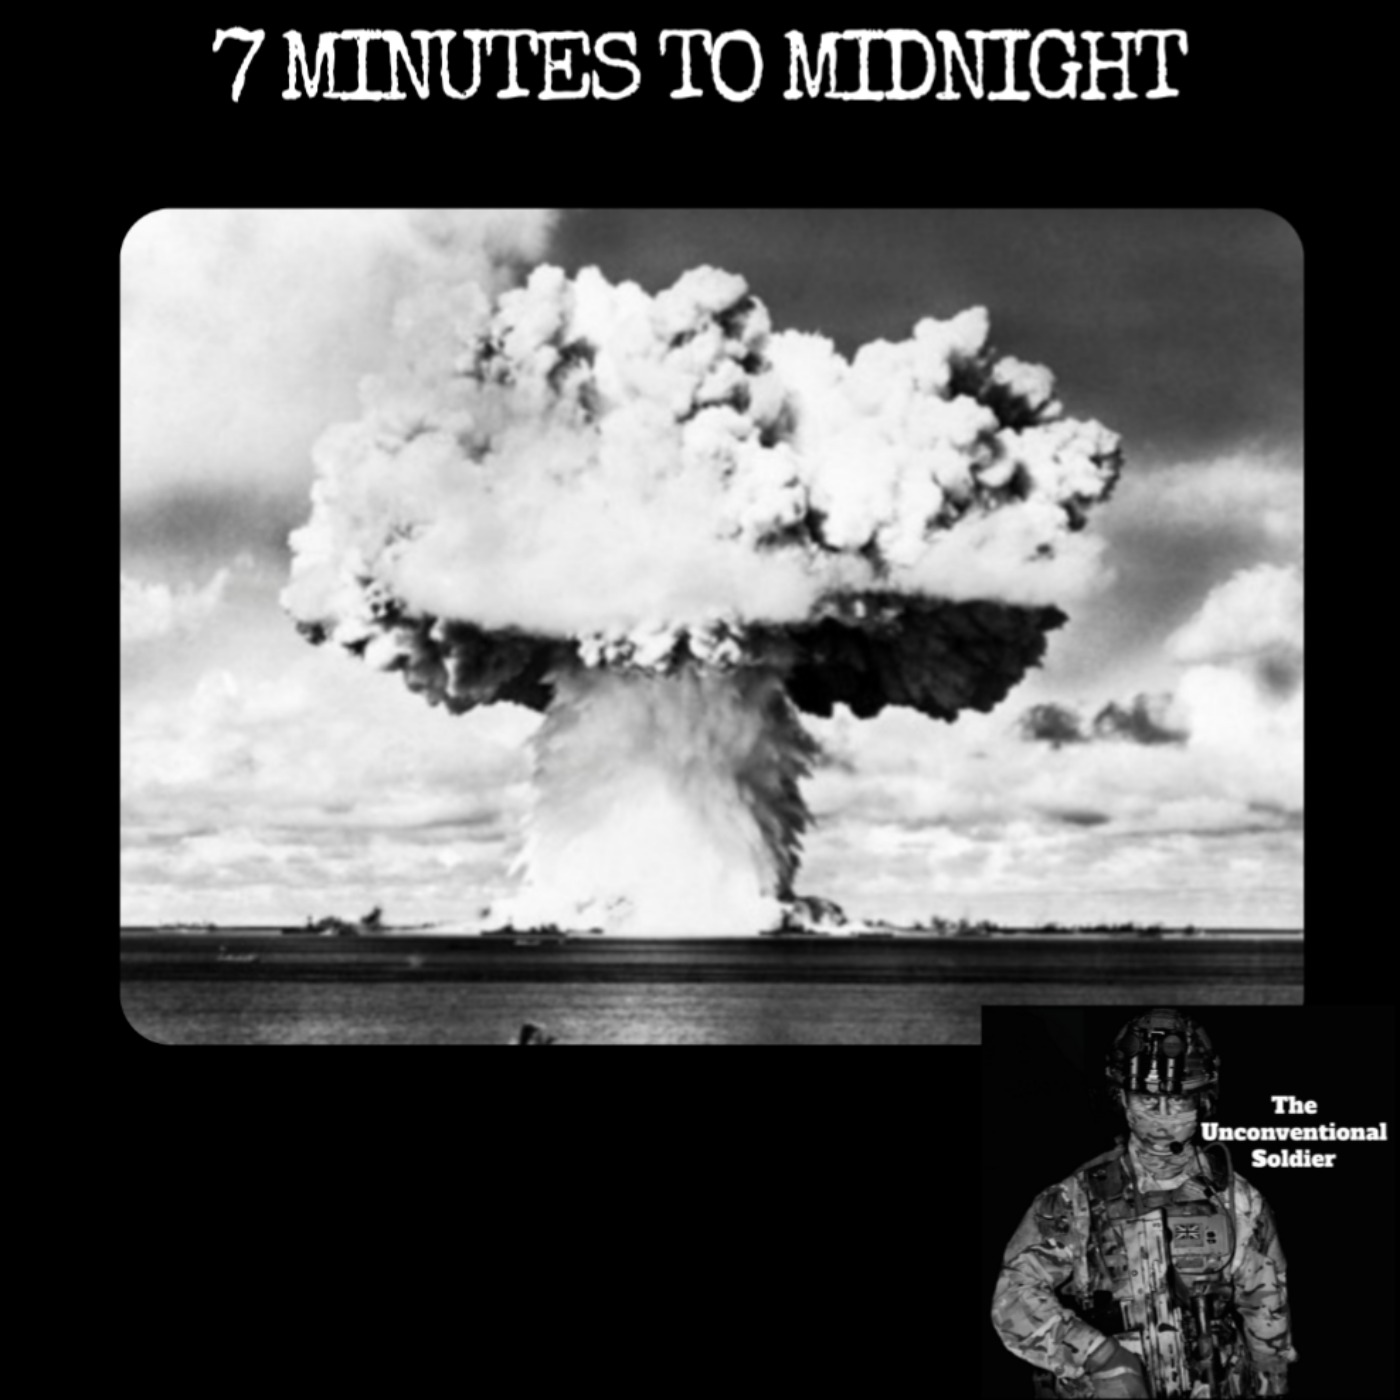 cover art for S4 #061 7 Minutes To Midnight - NATO Cold War "Stay Behind" Operations